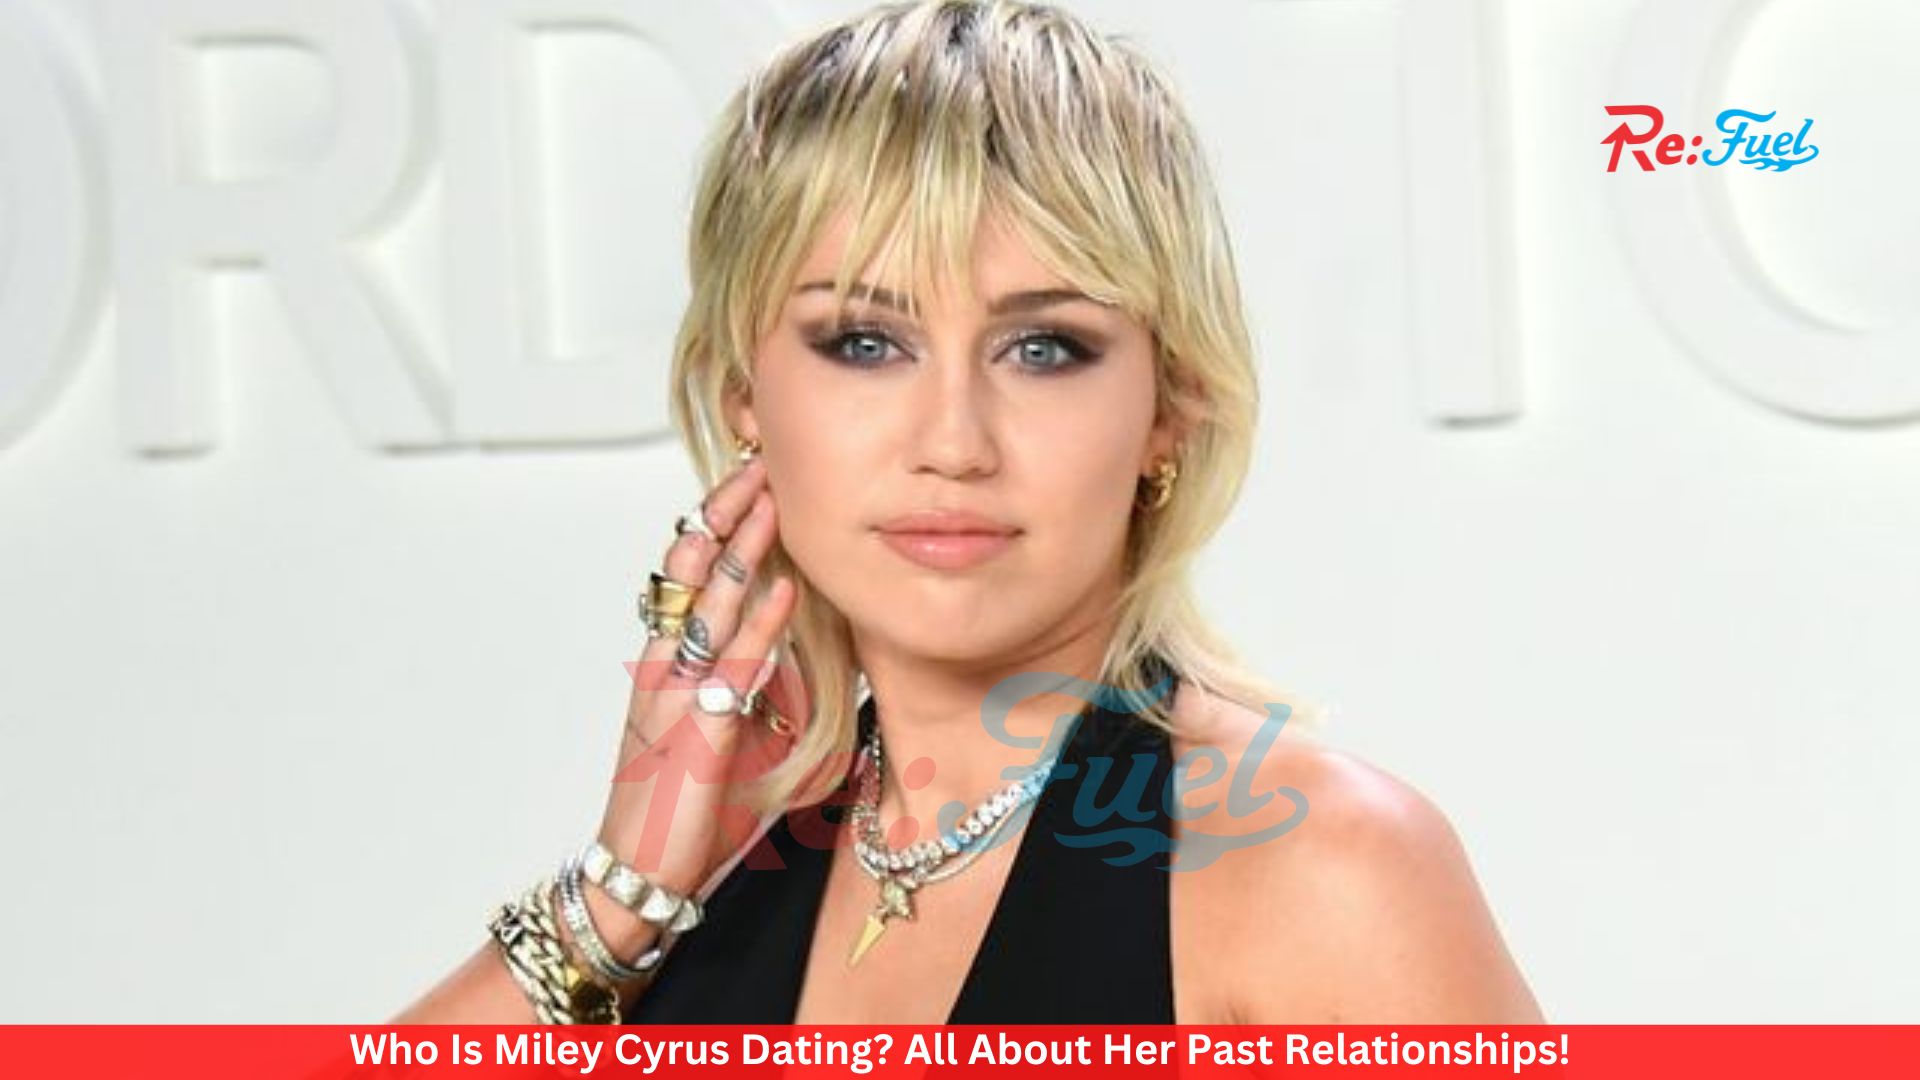 Who Is Miley Cyrus Dating? All About Her Past Relationships!